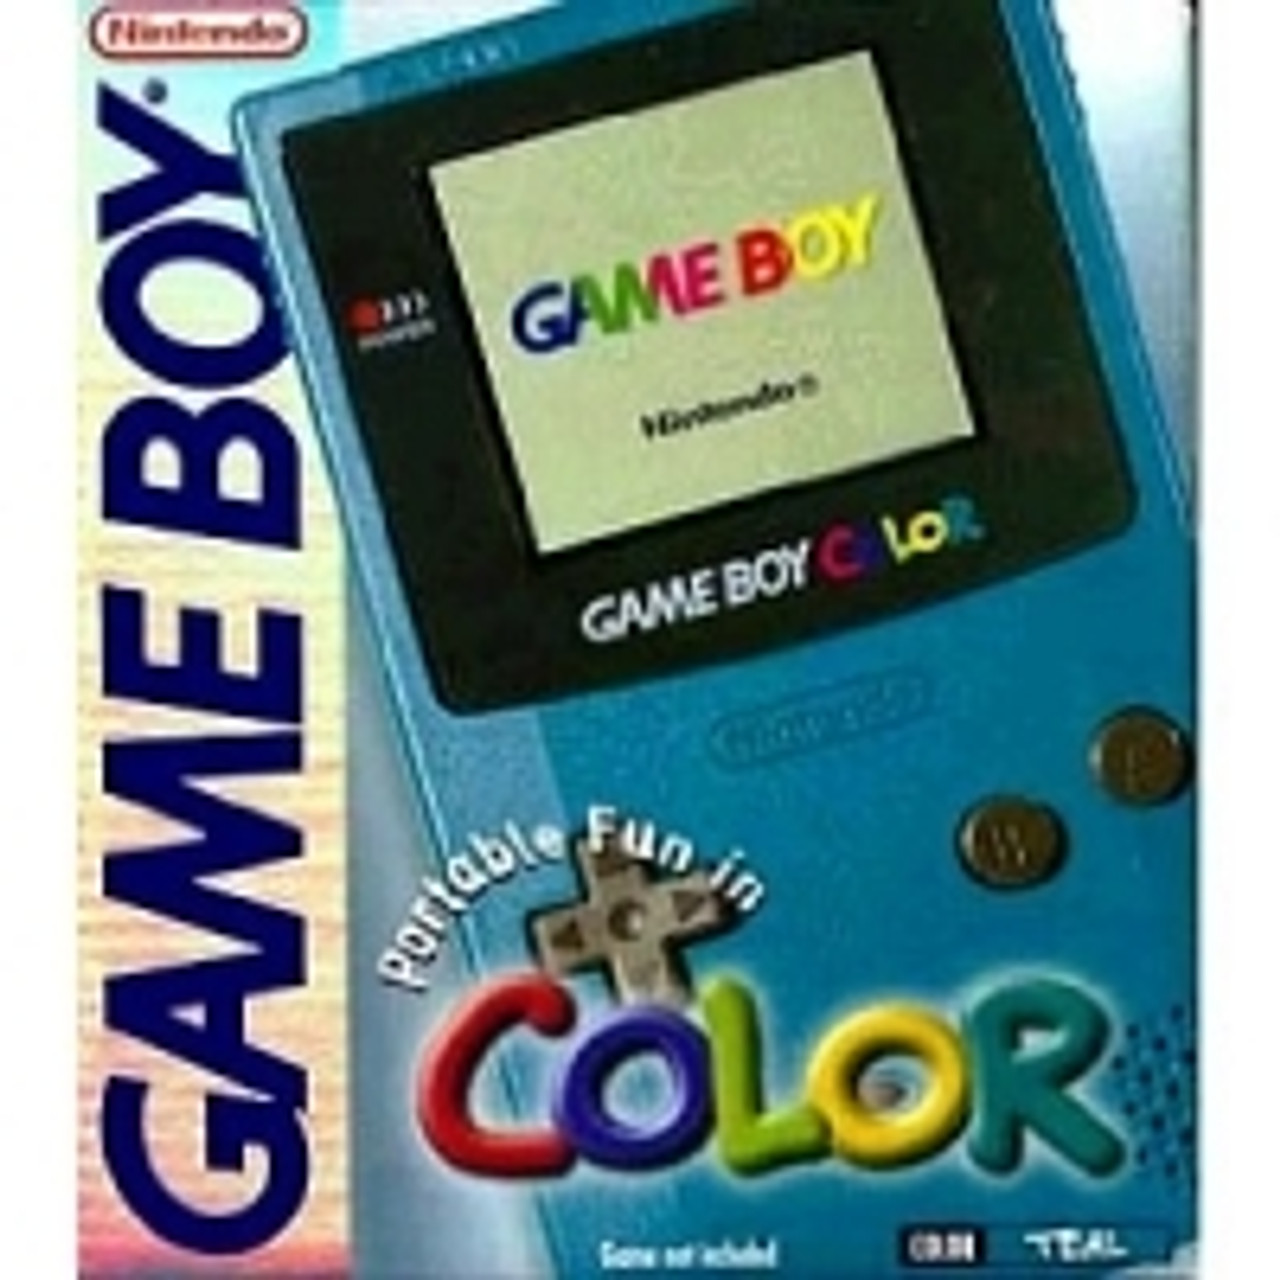 Nintendo Game Boy Color Handheld Game Console - Teal Case 3 Games &  Accessories